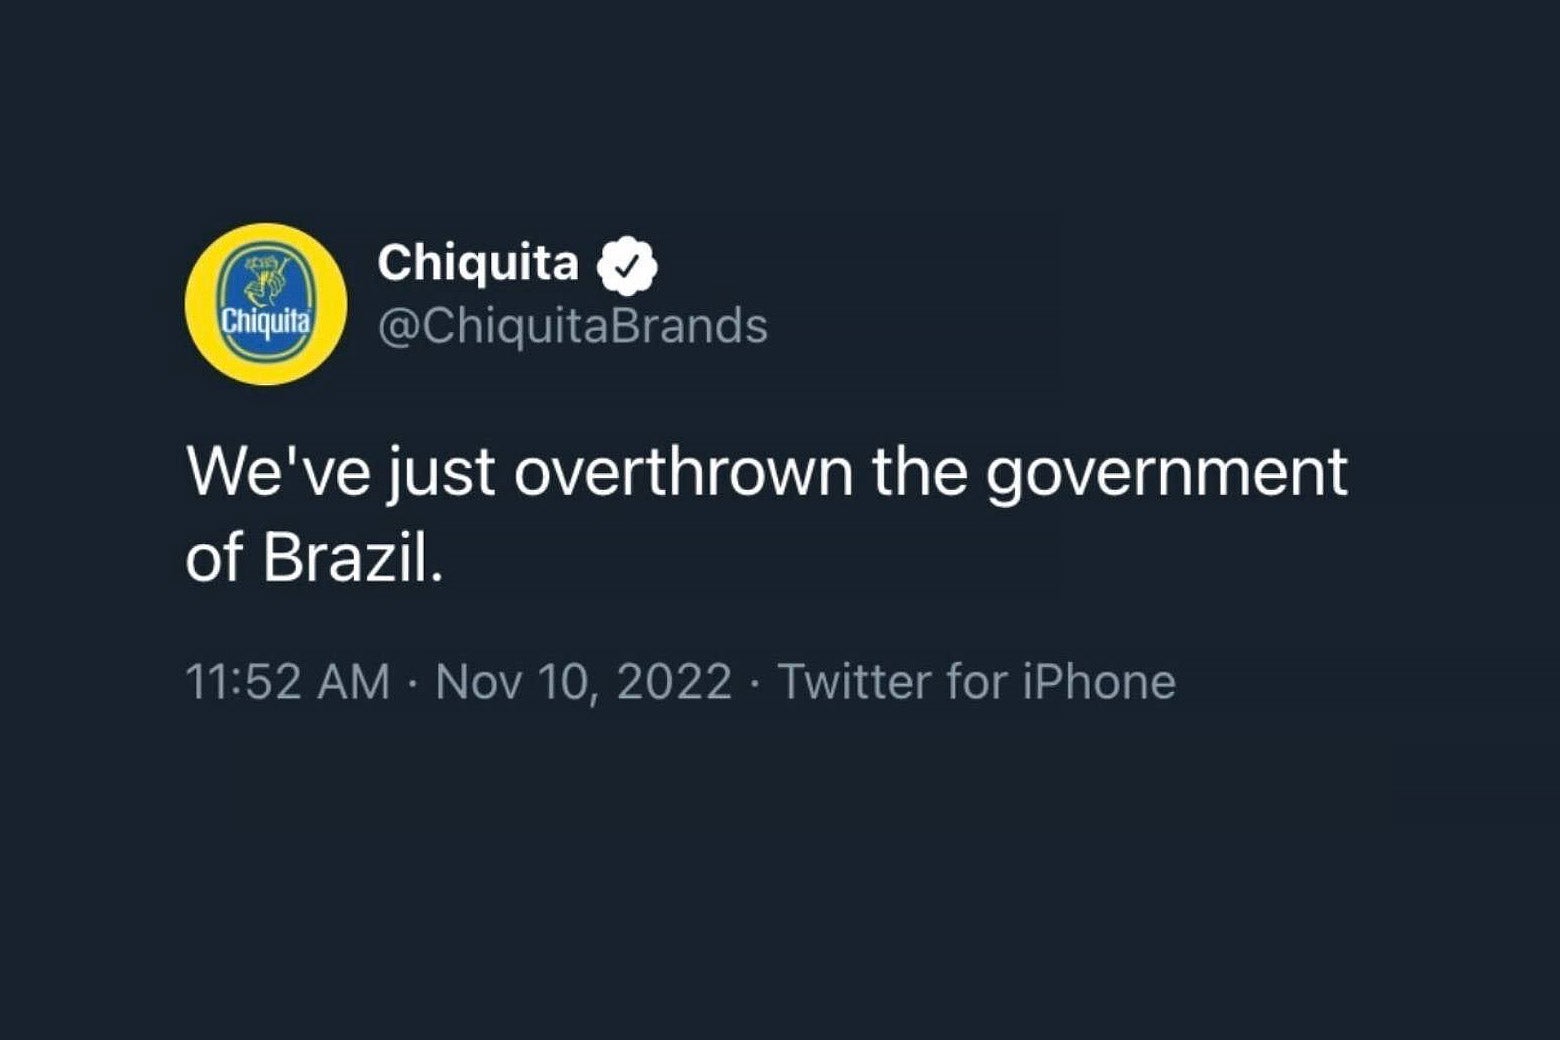 A screenshot of a tweet from a Chiquita parody account that says "We've just overthrown the government of Brazil."